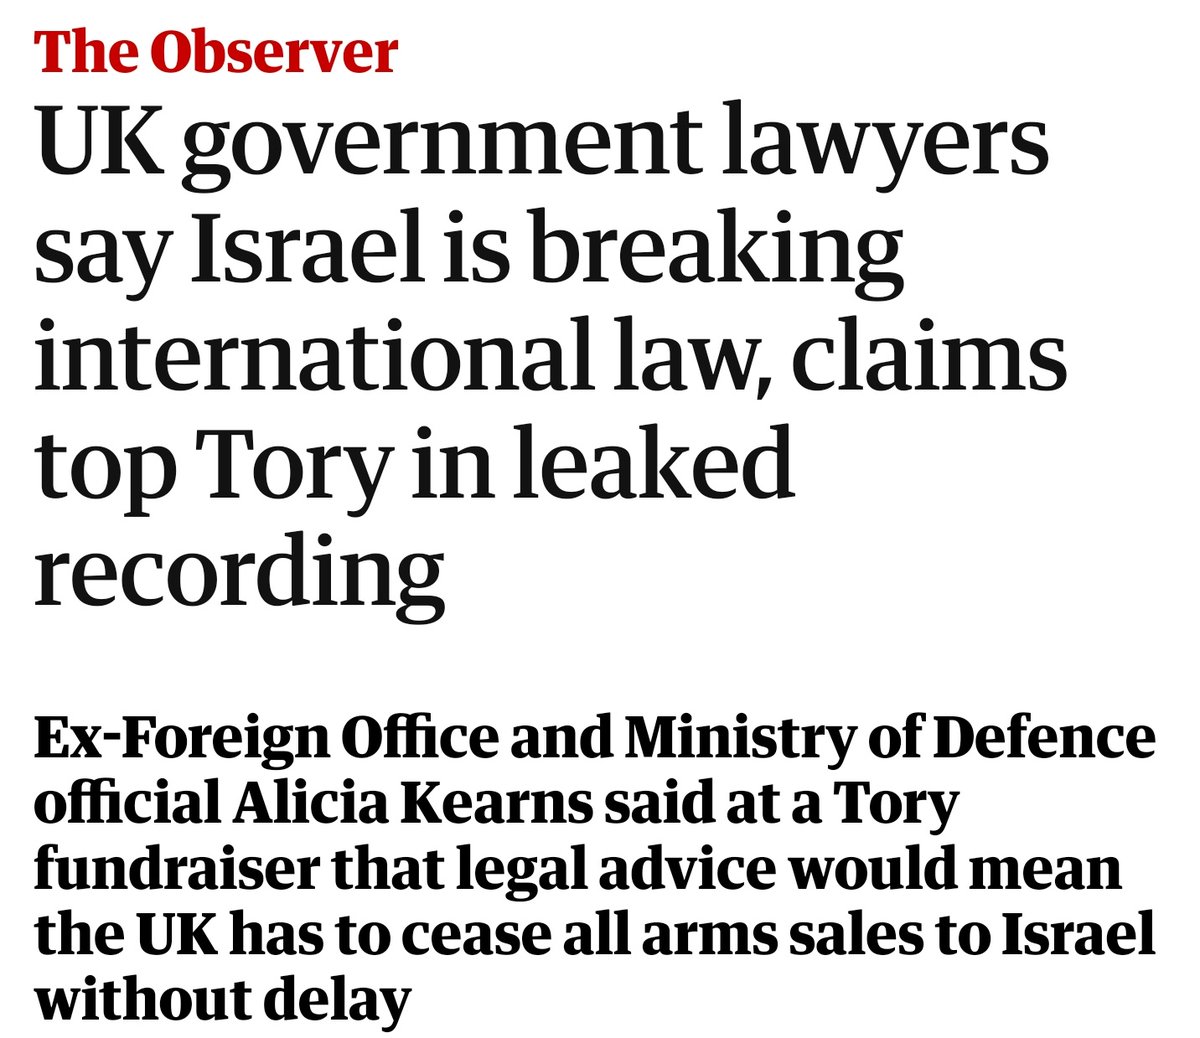 This is a major scandal. The British government has received advice from its own lawyers stating that Israel has breached international humanitarian law in Gaza but has failed to make it public, according to a leaked recording obtained by the Observer.